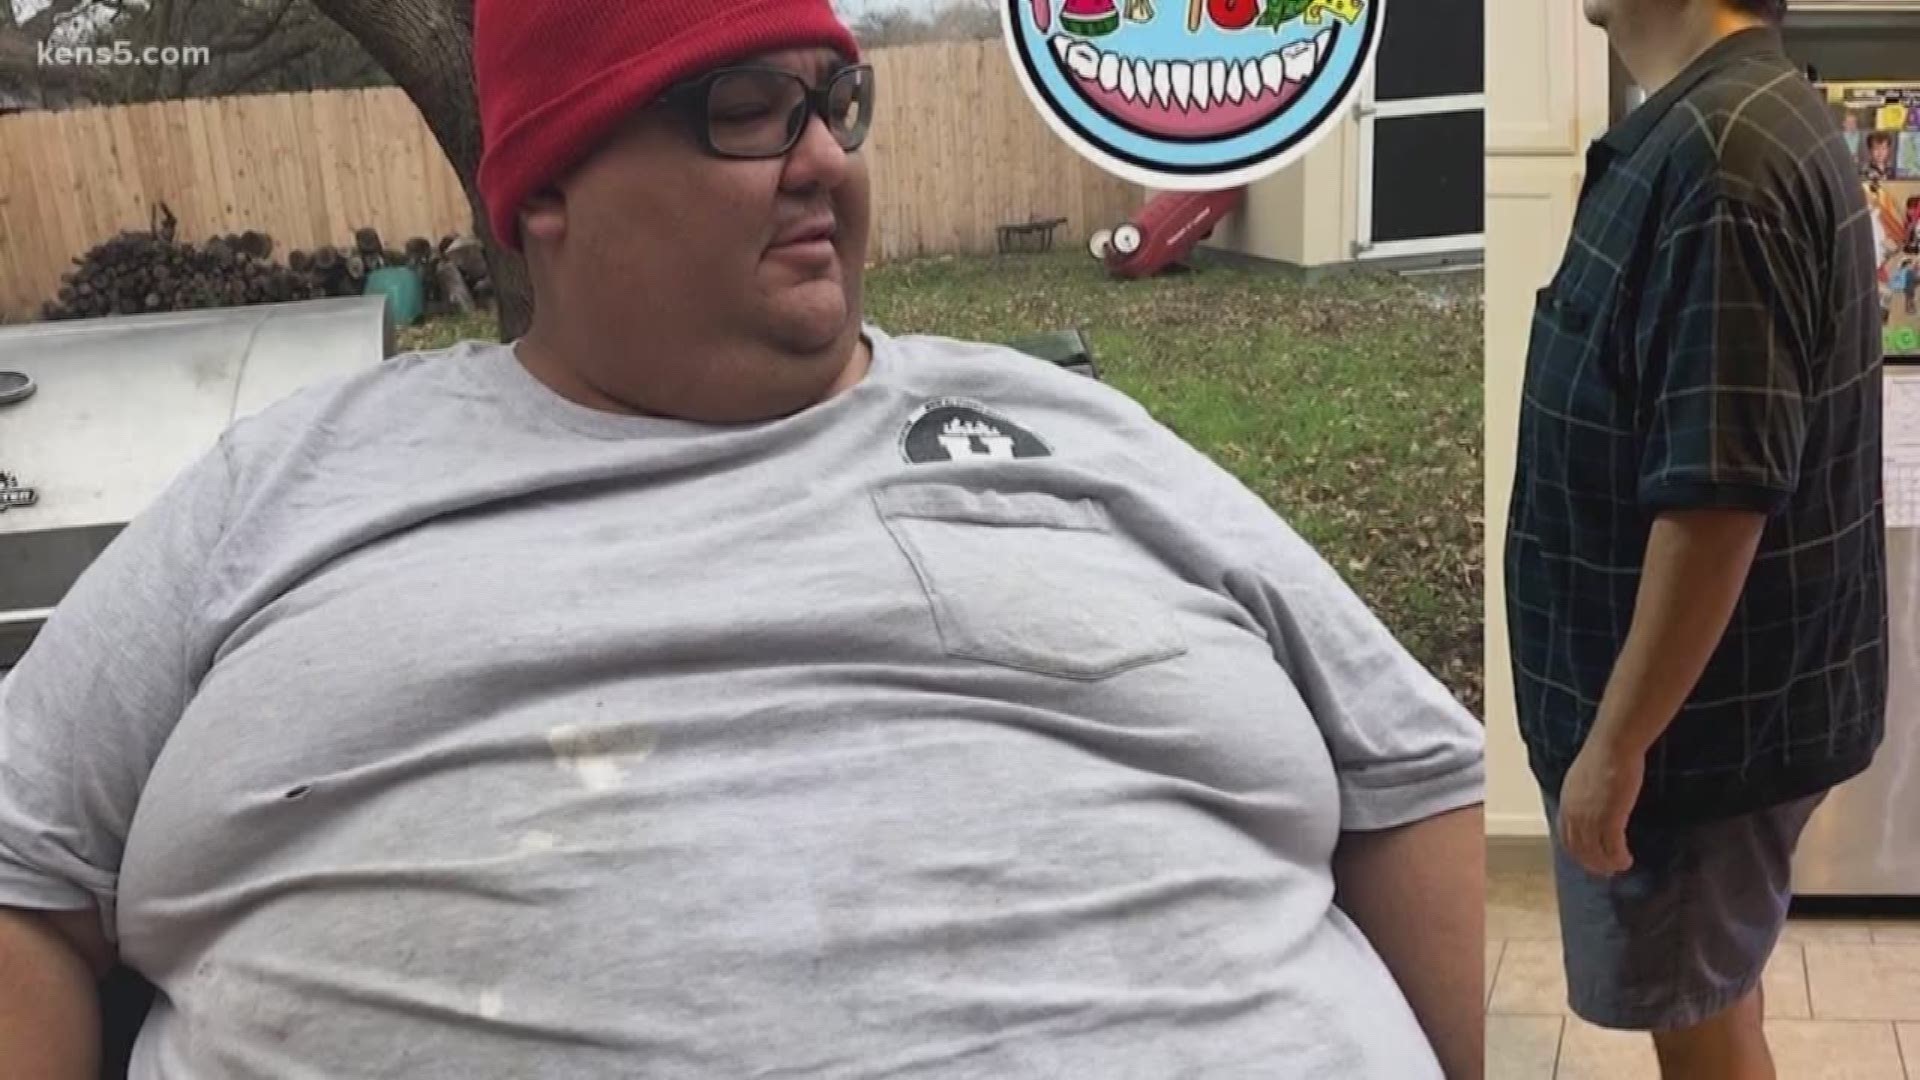 Chuck Hernandez lost 220 pounds in just 18 months. This is his story.